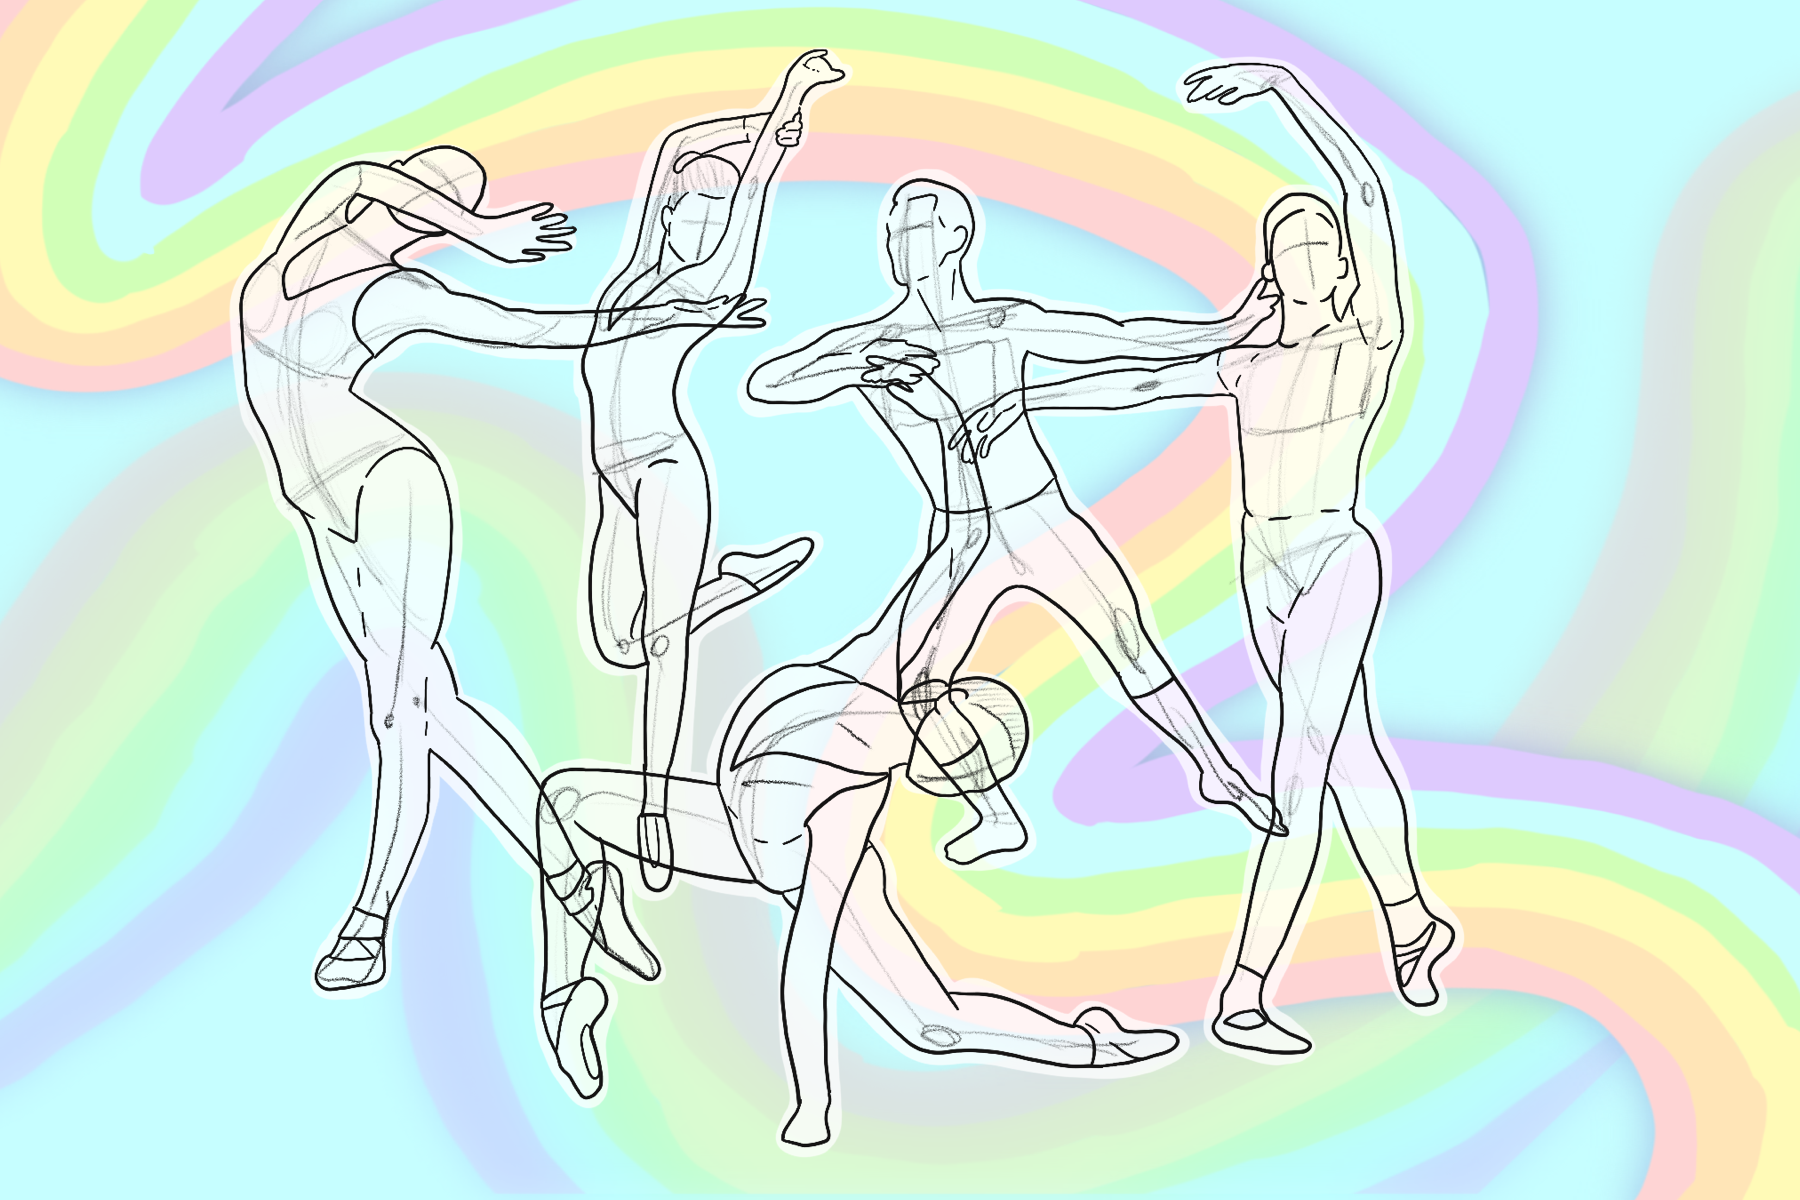 An illustration of LGBTQ+ dancers. (Illustration by Giovanna Martin, Columbia College Chicago)